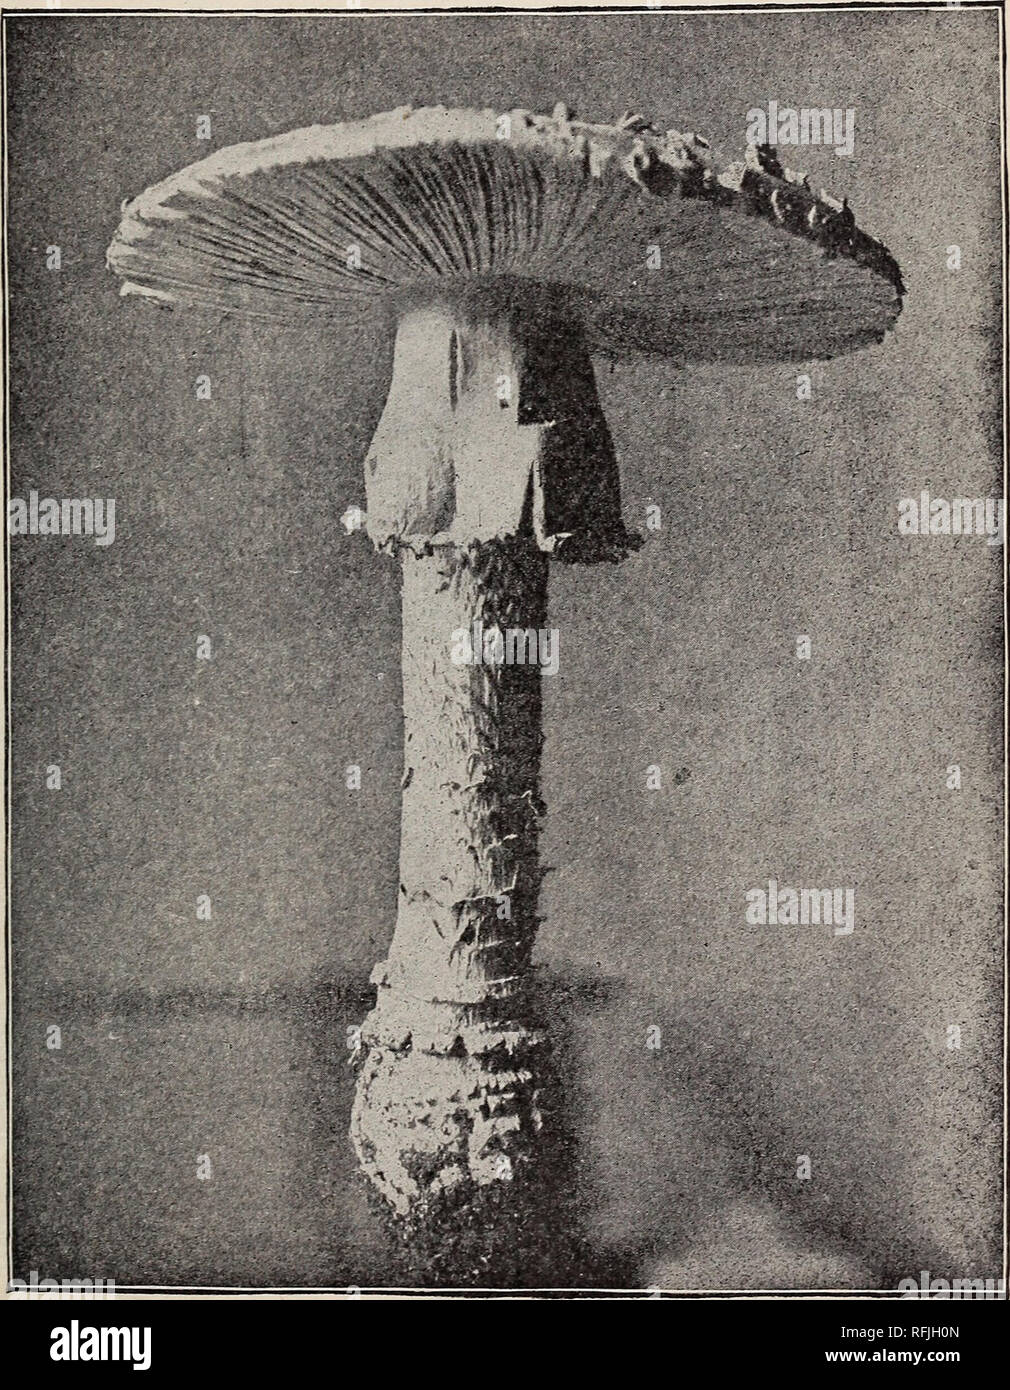 . Observations on recent cases of mushroom poisoning in the District of Columbia. 15 THE FLY AMANITA (POISONOUS). Amanita muscaria (L.) Pers. Fig. 18 shows a fully developed specimen of the fly amanita, the commonest of the poisonous mushrooms of the District of Columbia. Fig. 19 shows another specimen in a different position, and fig. 20 a top view of its cap. The points especially to be noted are the bulbous enlargement at the base of the stem, breaking into thick scales above, the very broad drooping ring near the top of the stem, and. Fig. 19.—Fly amanita, Amanita muscaria. Poisonous. One- Stock Photo